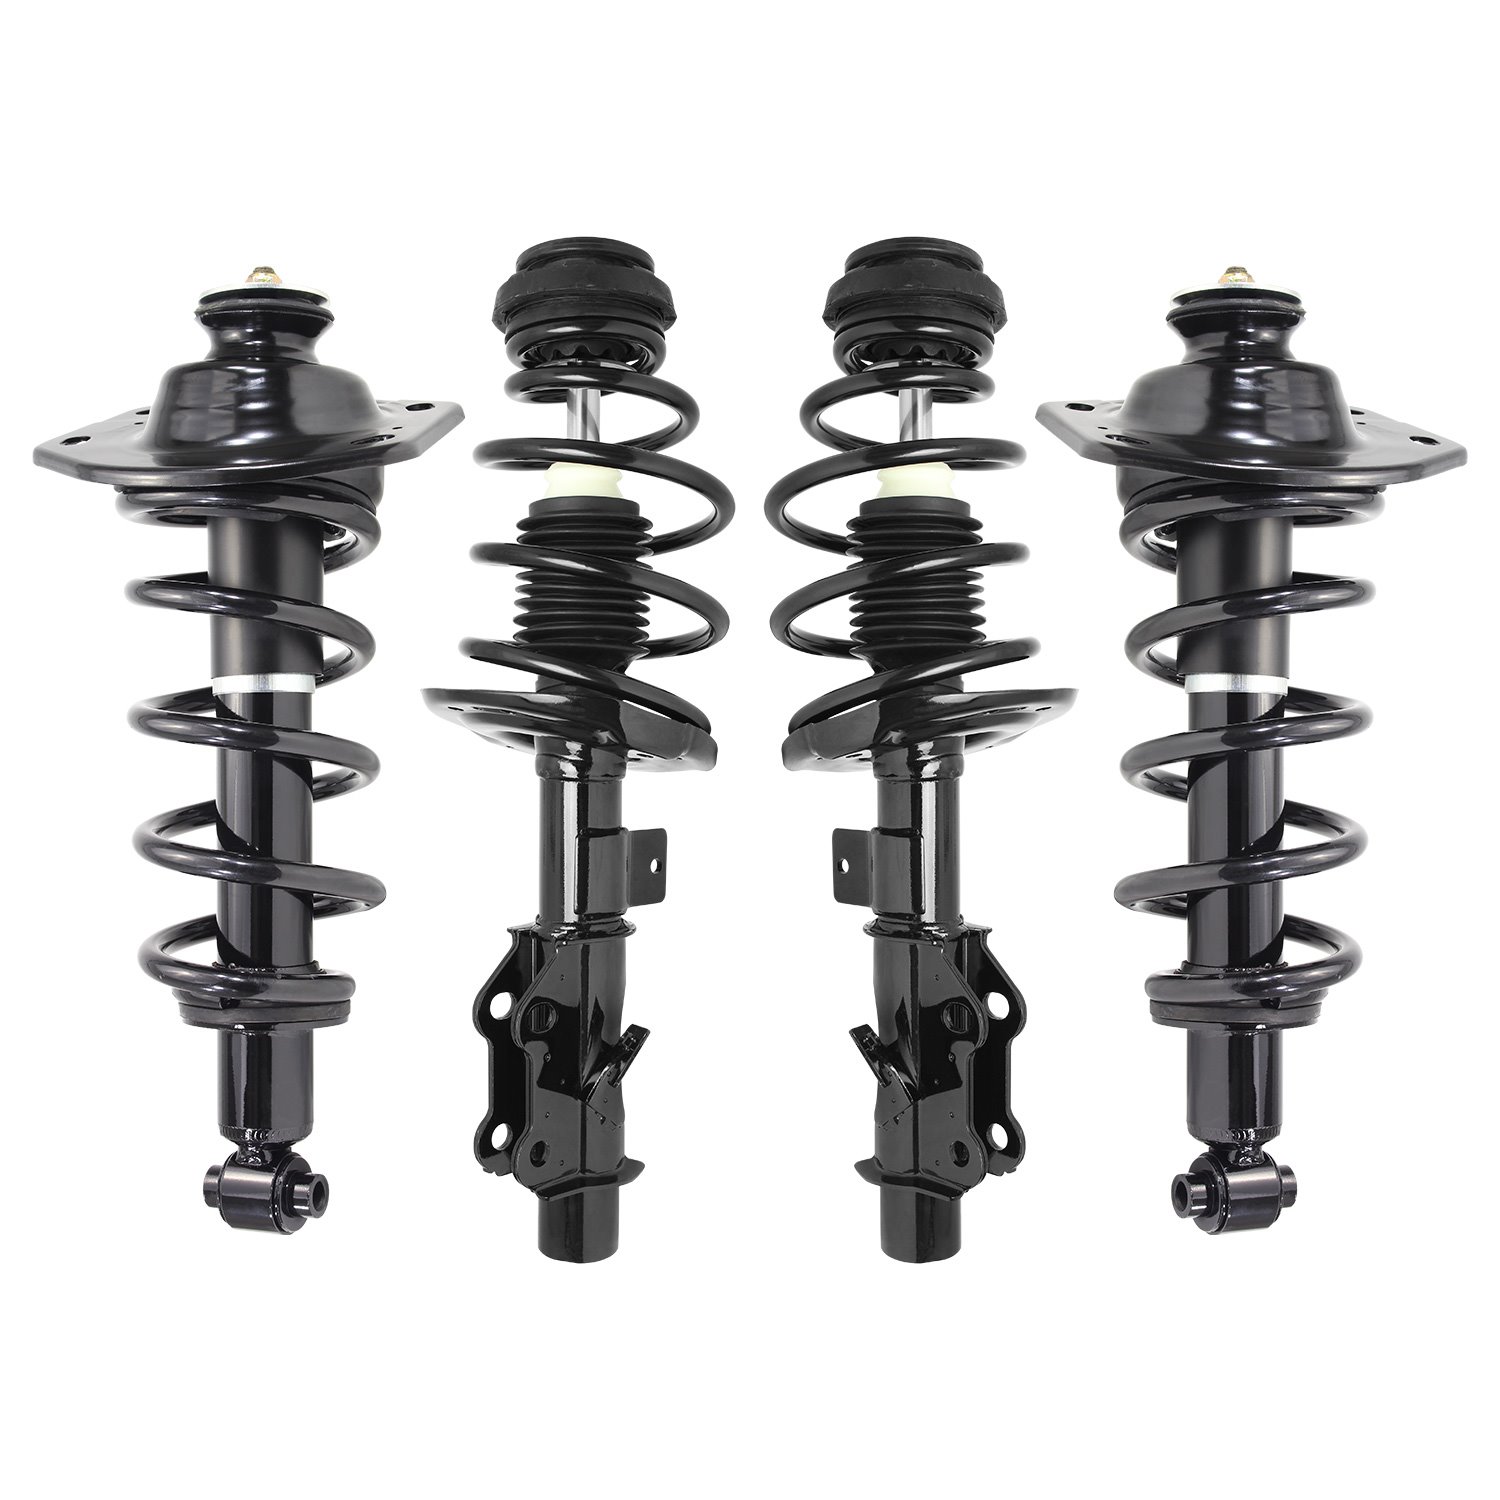 4-11625-15203-001 Front & Rear Suspension Strut & Coil Spring Assembly Kit Fits Select Chevy Camaro